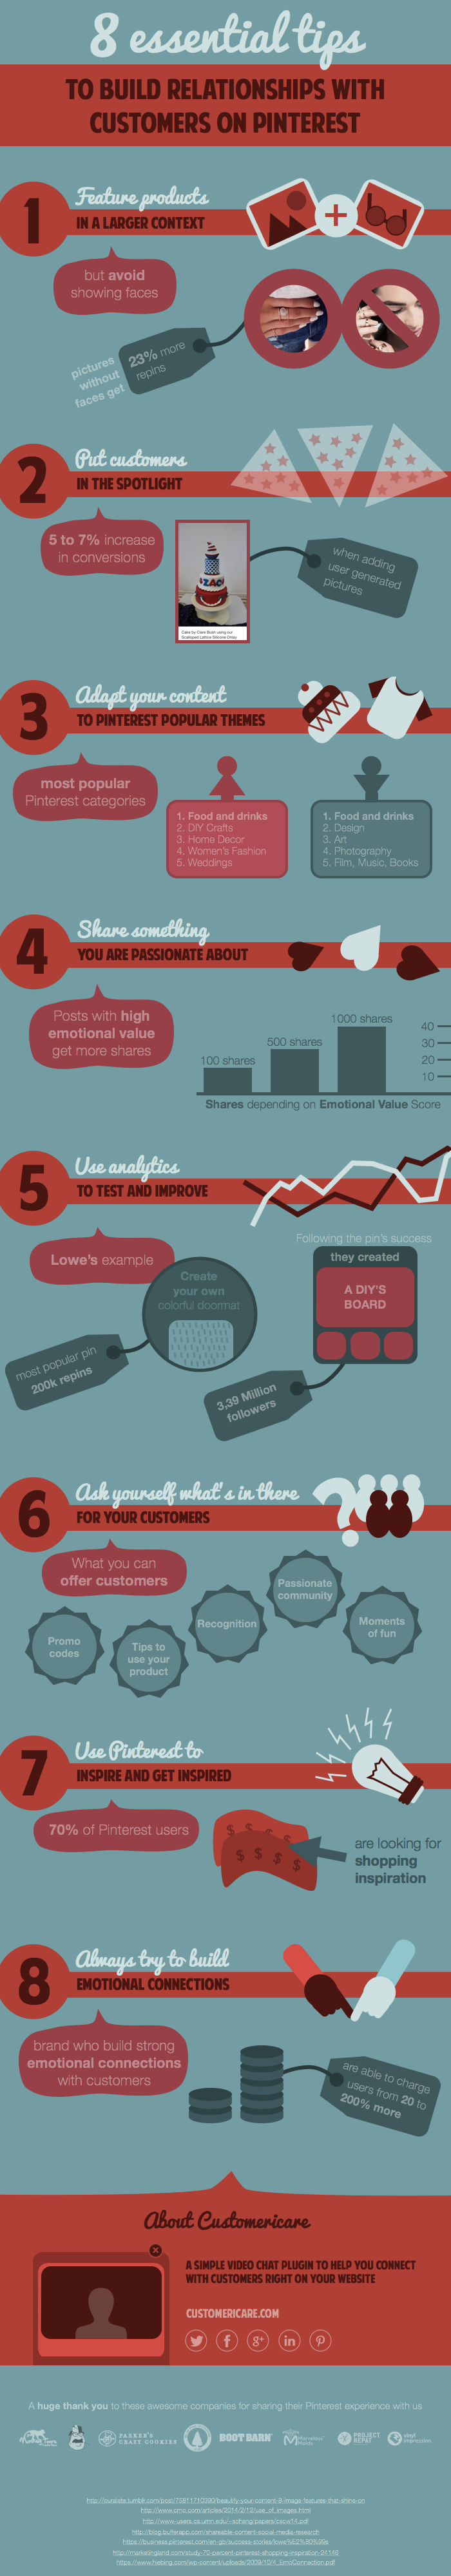 How To Build Relationships With Customers On #Pinterest - #infographic